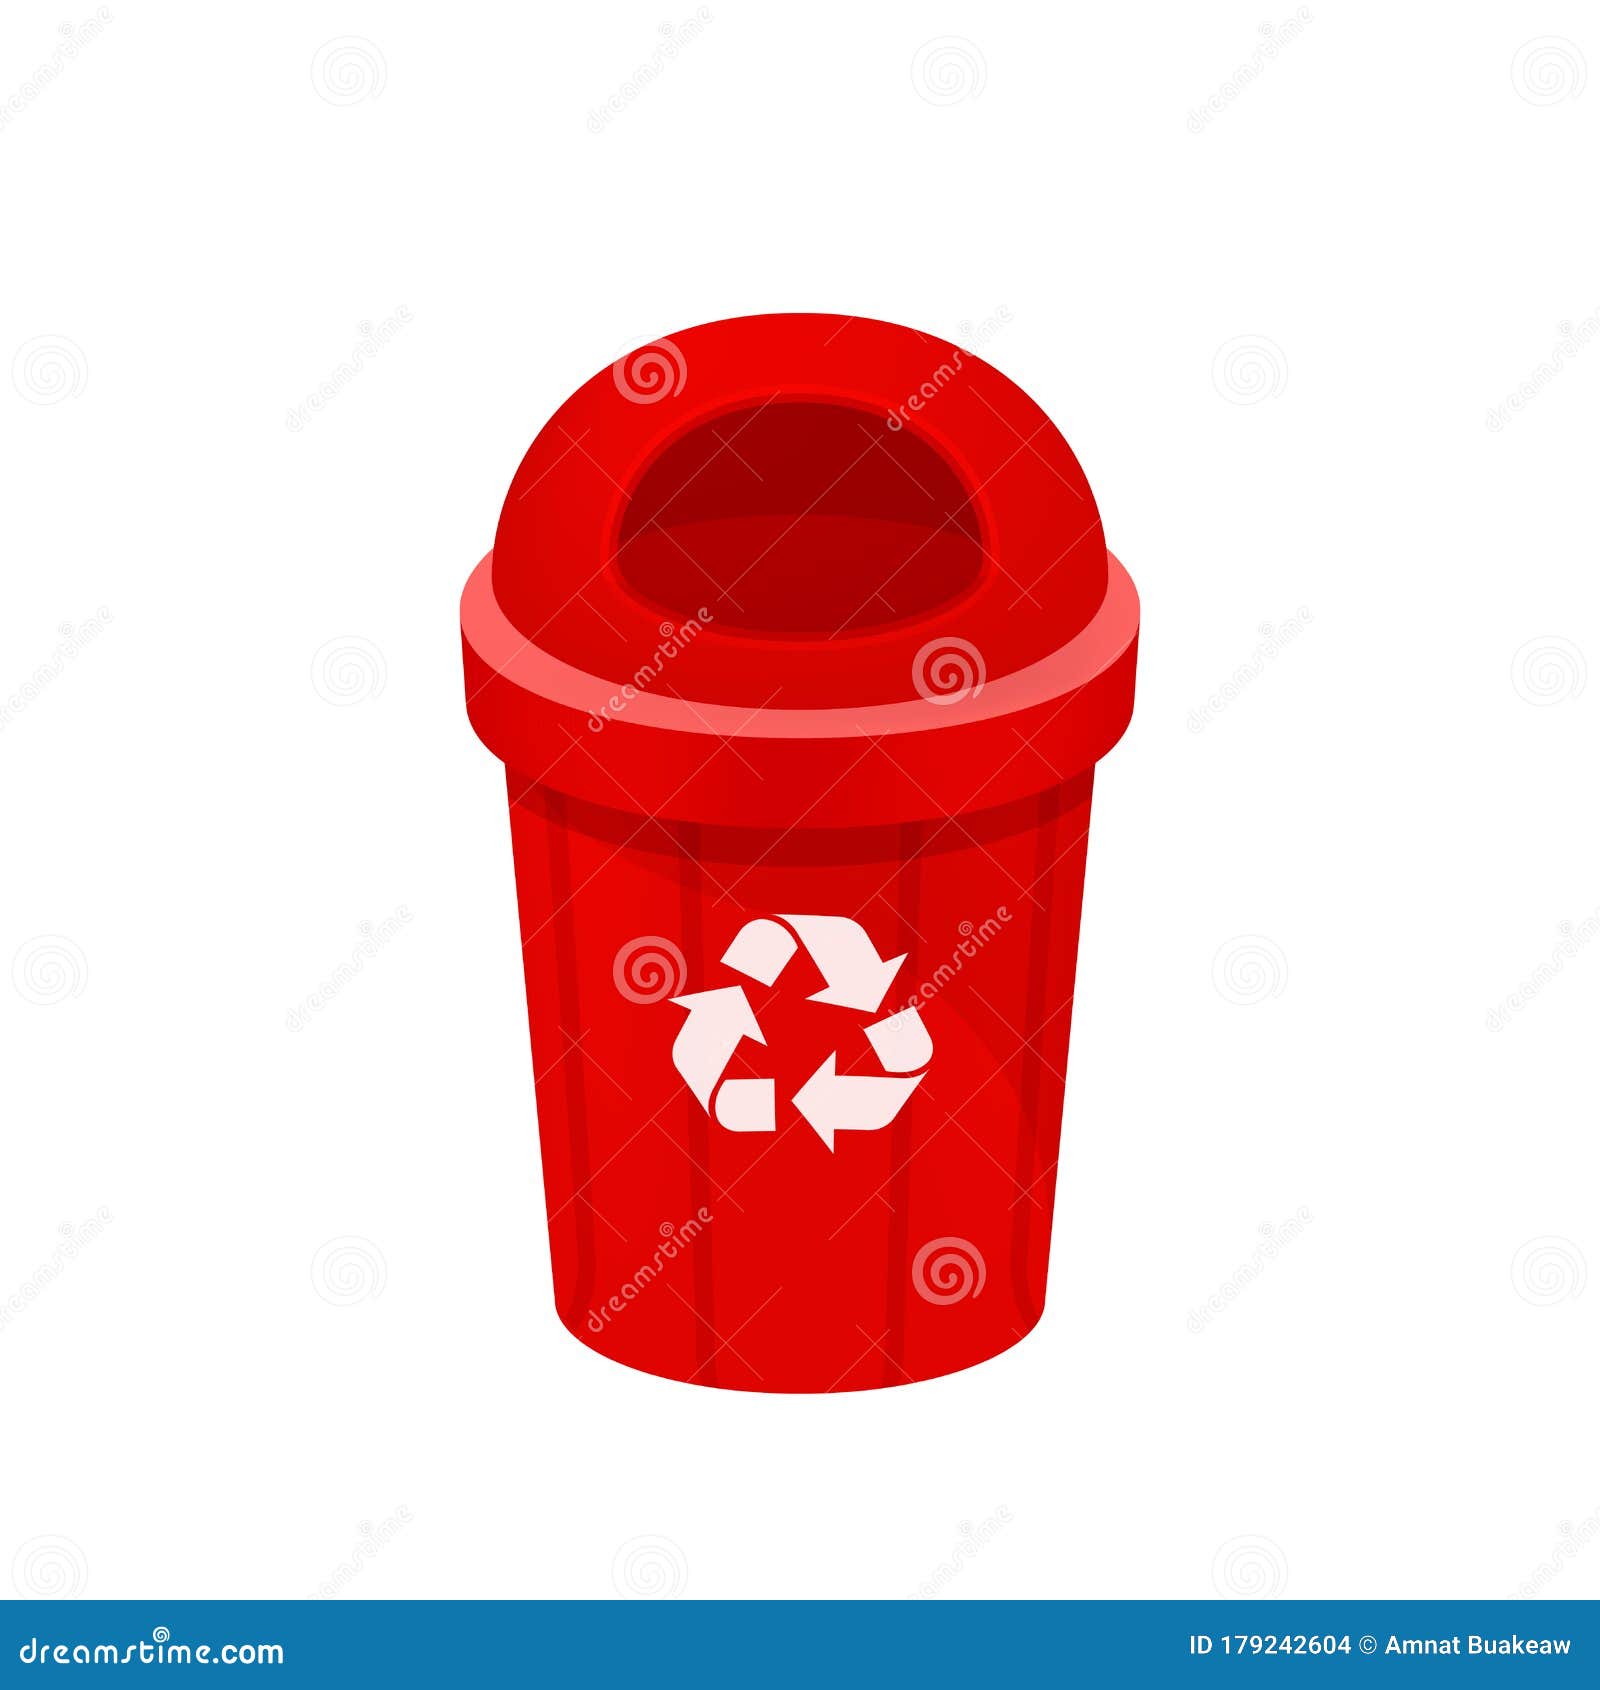 https://thumbs.dreamstime.com/z/red-bin-isolated-white-background-clip-art-recycle-small-illustration-plastic-flat-icon-waste-trash-can-dustbin-garbage-179242604.jpg